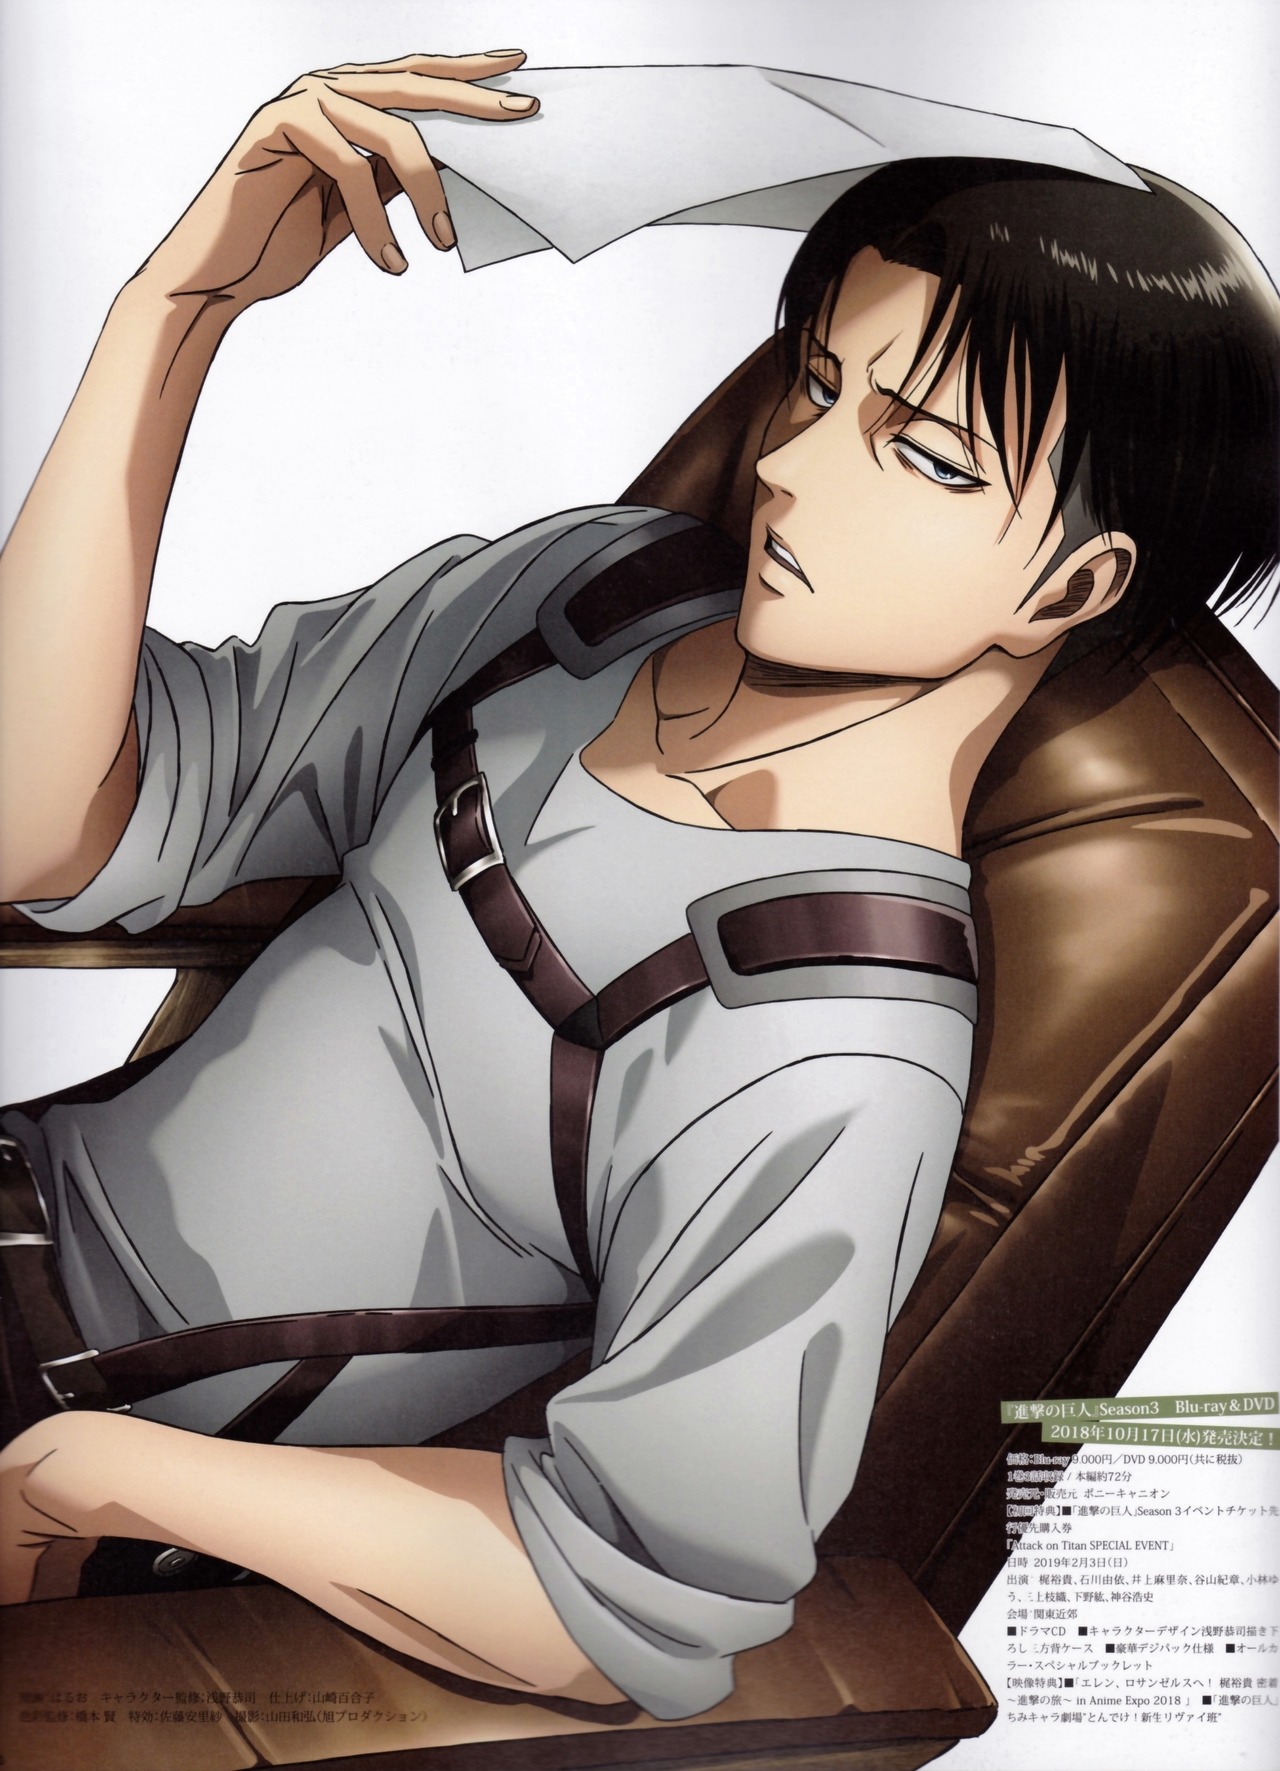 snknews: tdkr-cs91939: Vol.41 of spoon.2Di features another Levi illustration and